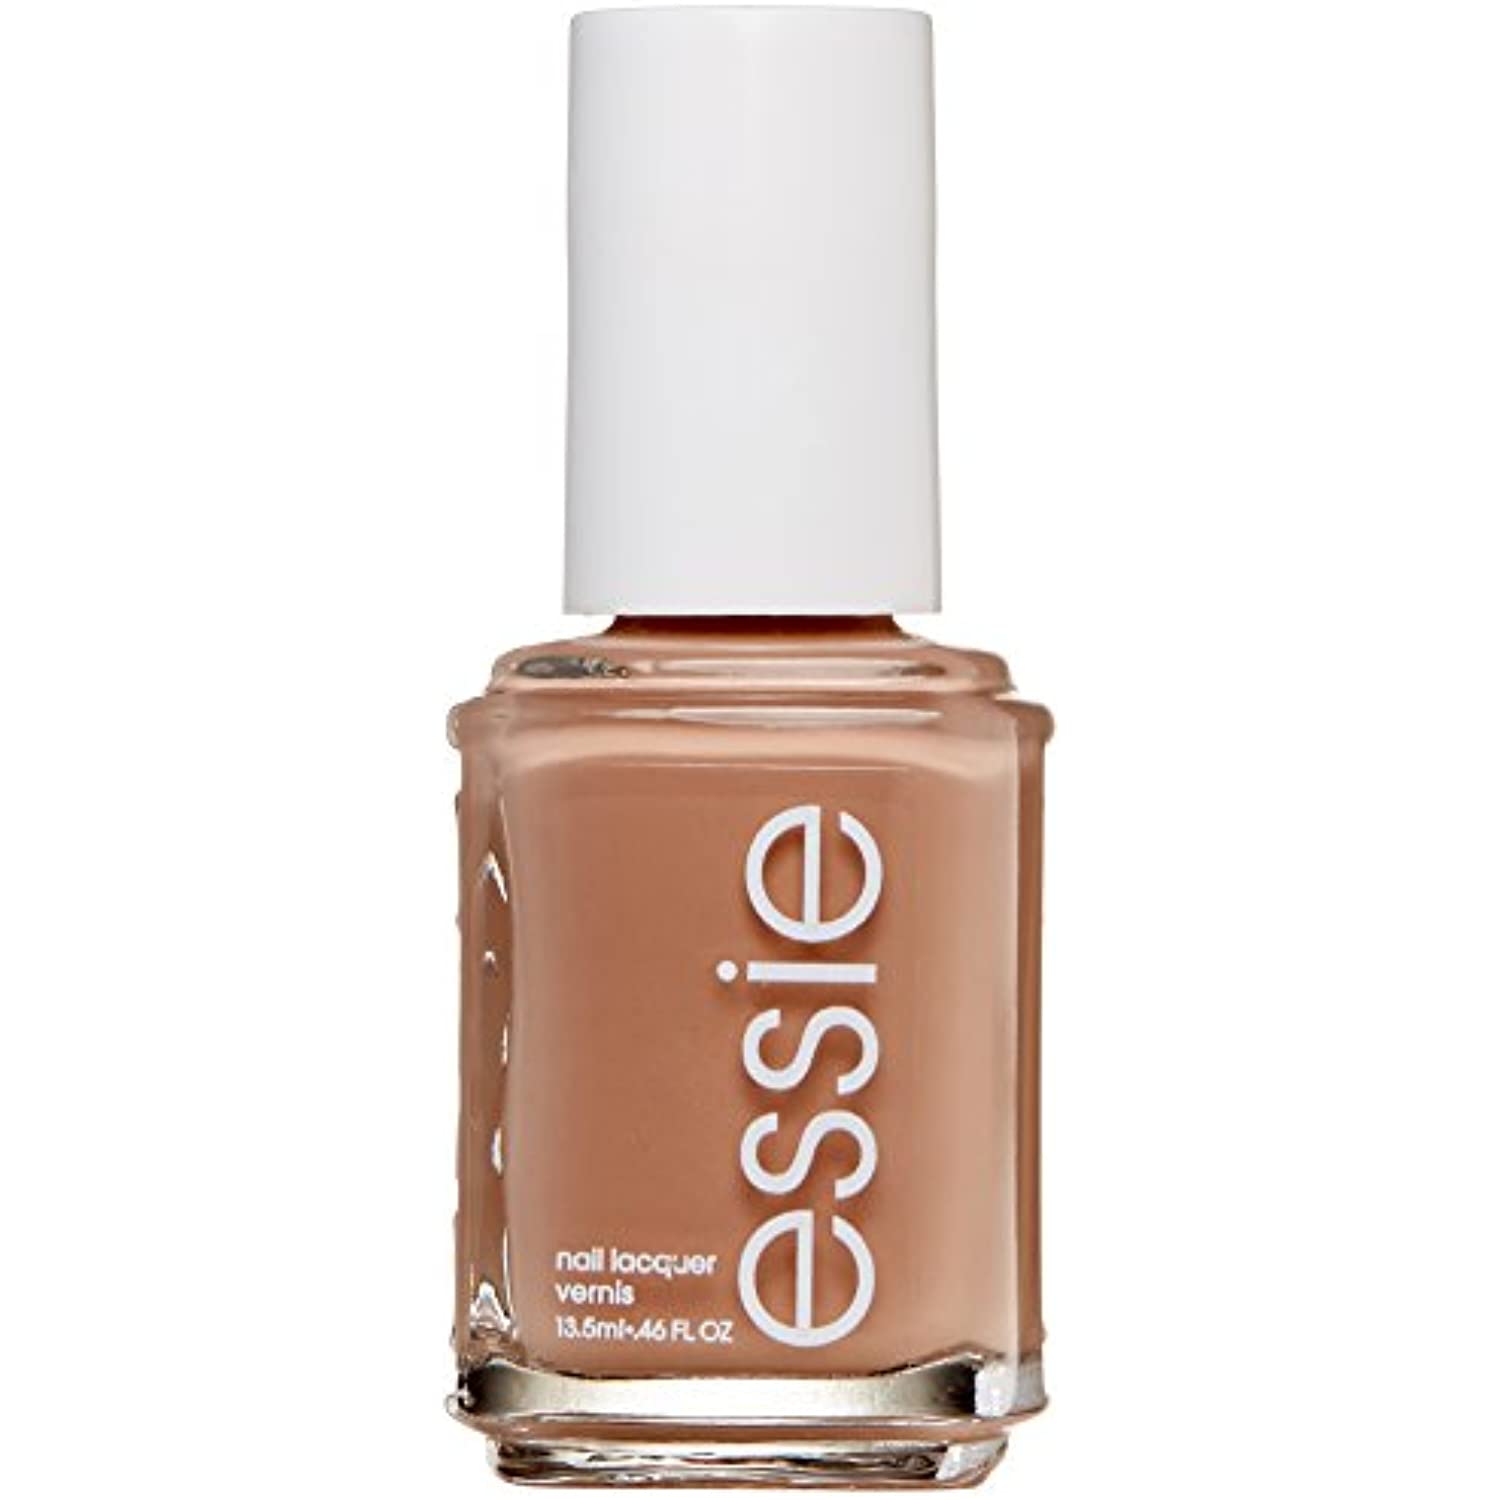 essie Nail Polish, Picked Perfect - image 2 of 7